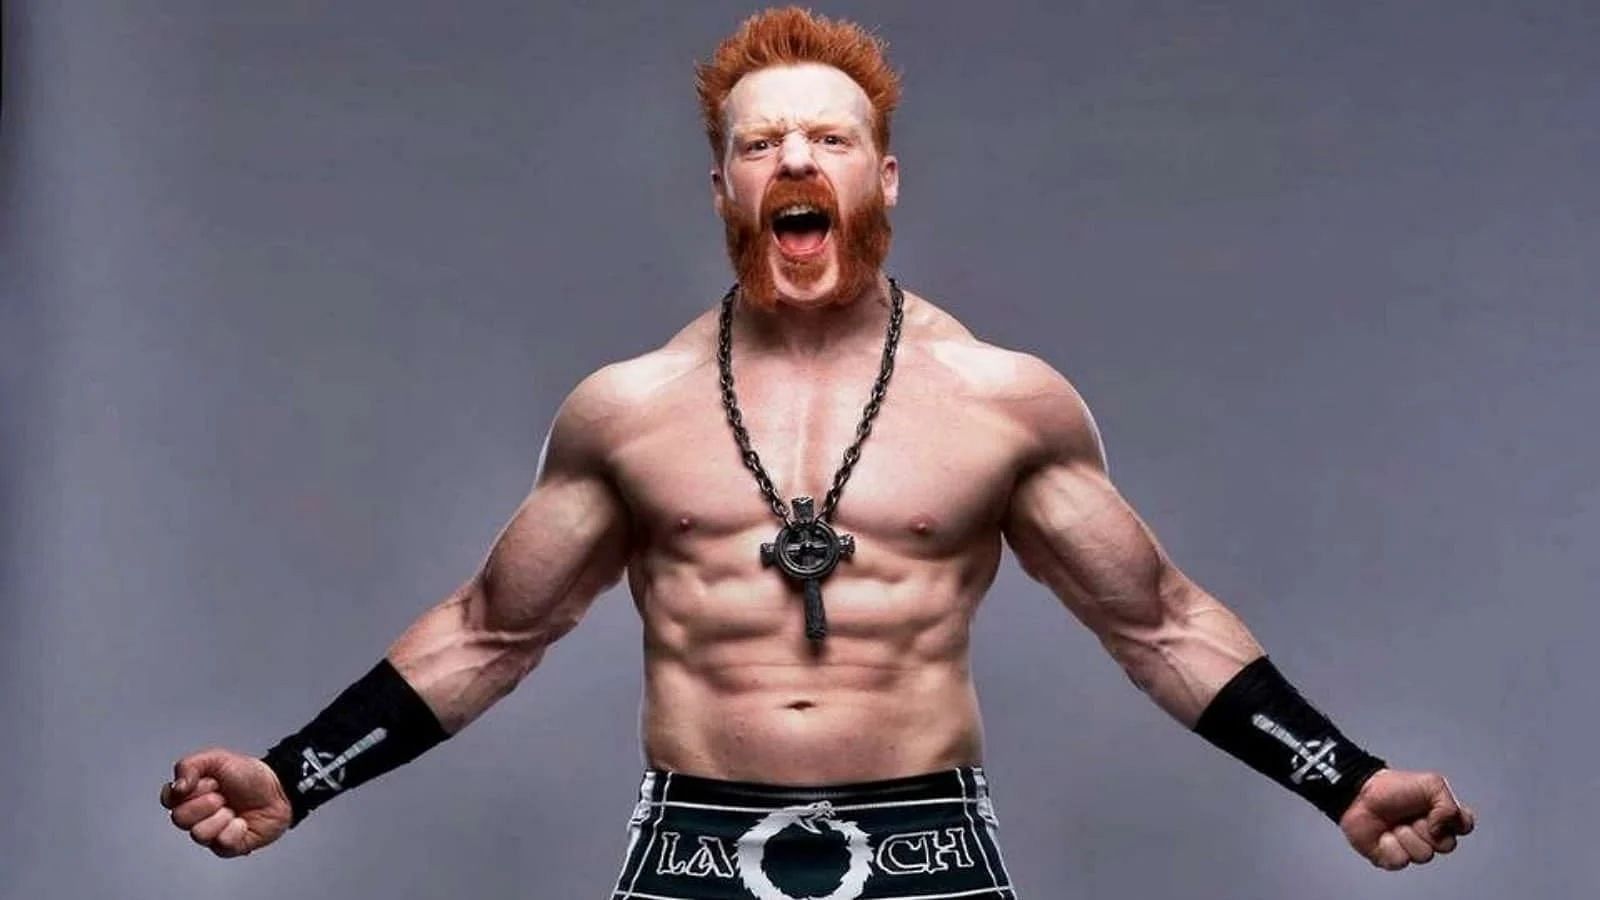 What is Sheamus Net Worth as of 2023?